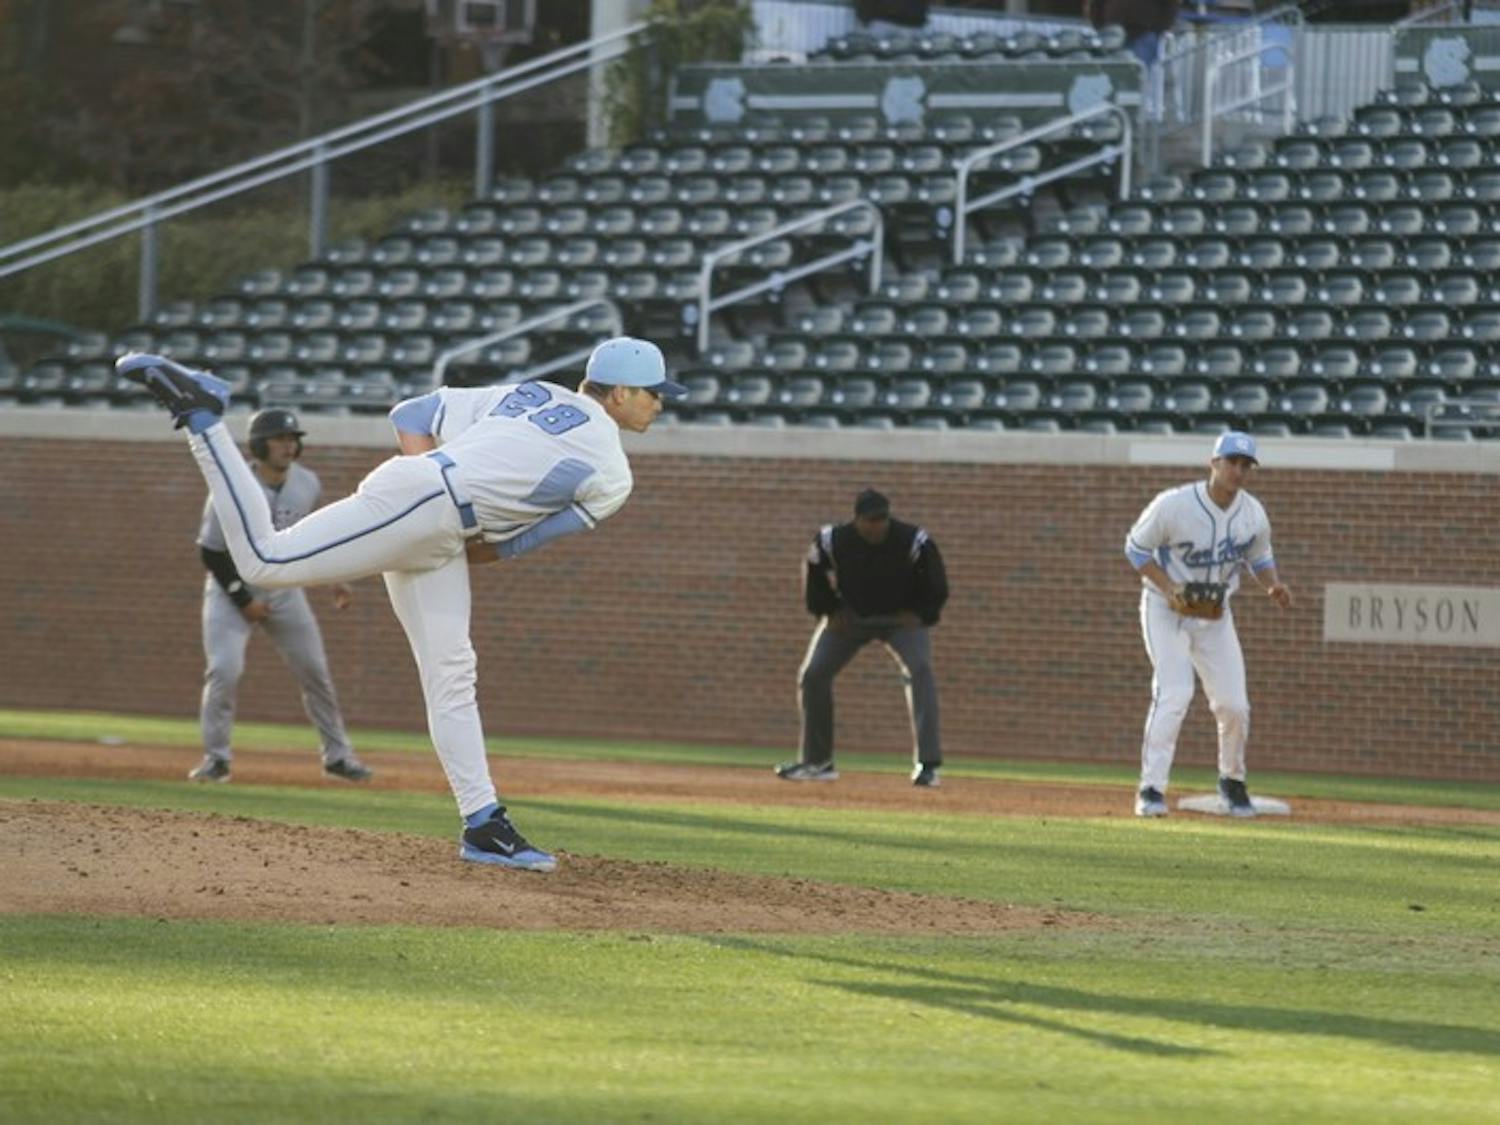 UNC pitcher Reilly Hovis delivers a pitch early in the game Tuesday.